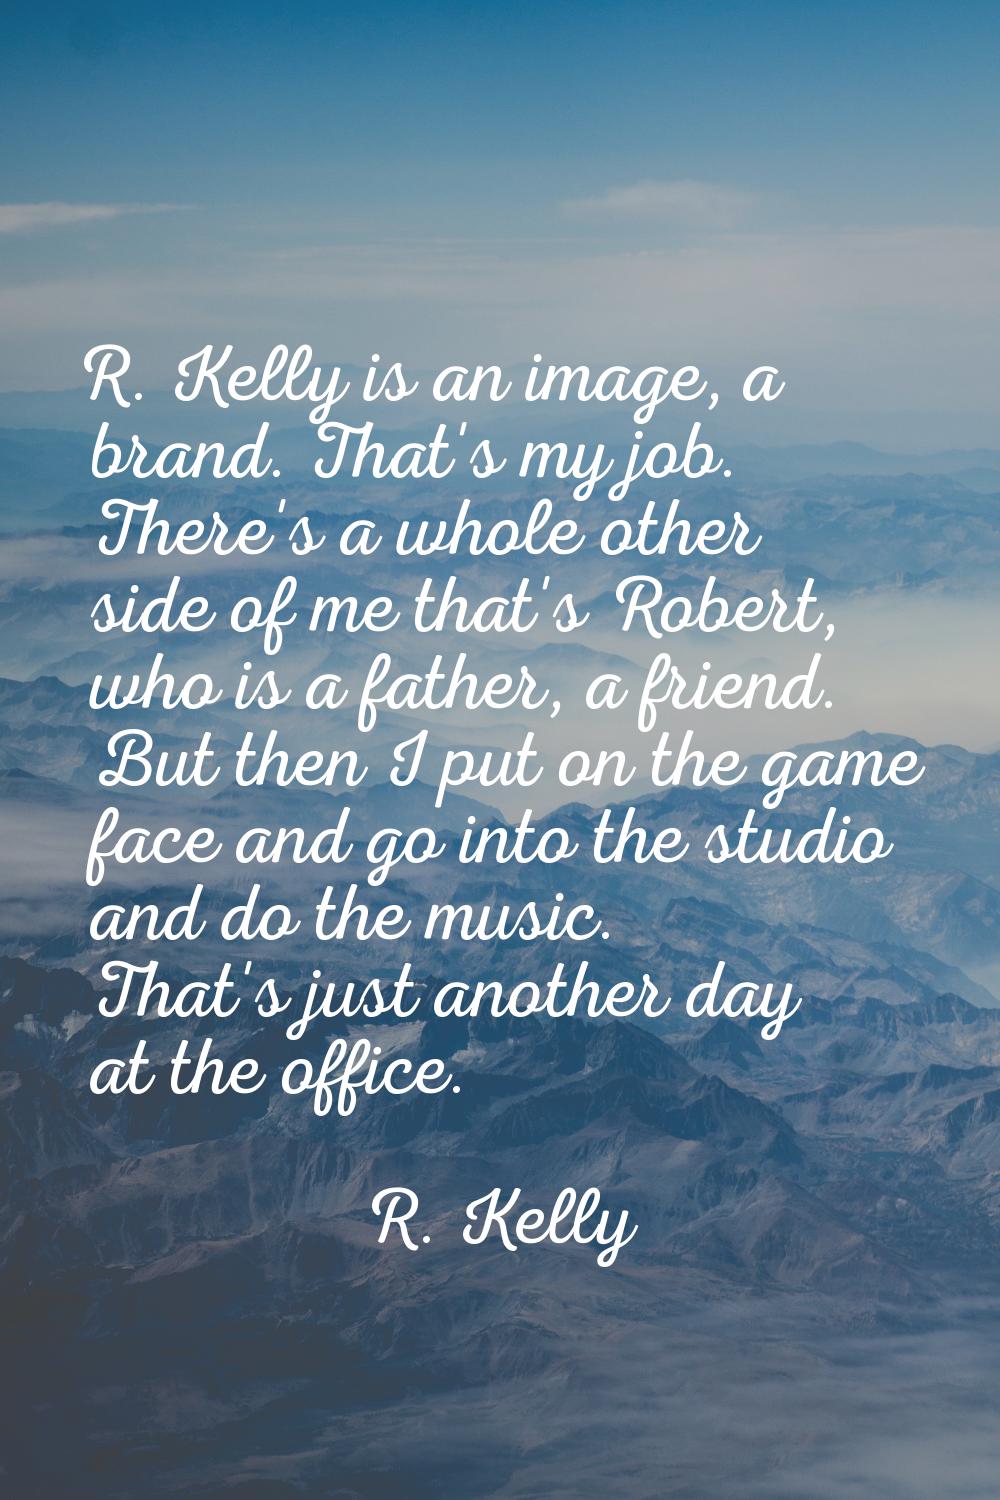 R. Kelly is an image, a brand. That's my job. There's a whole other side of me that's Robert, who i